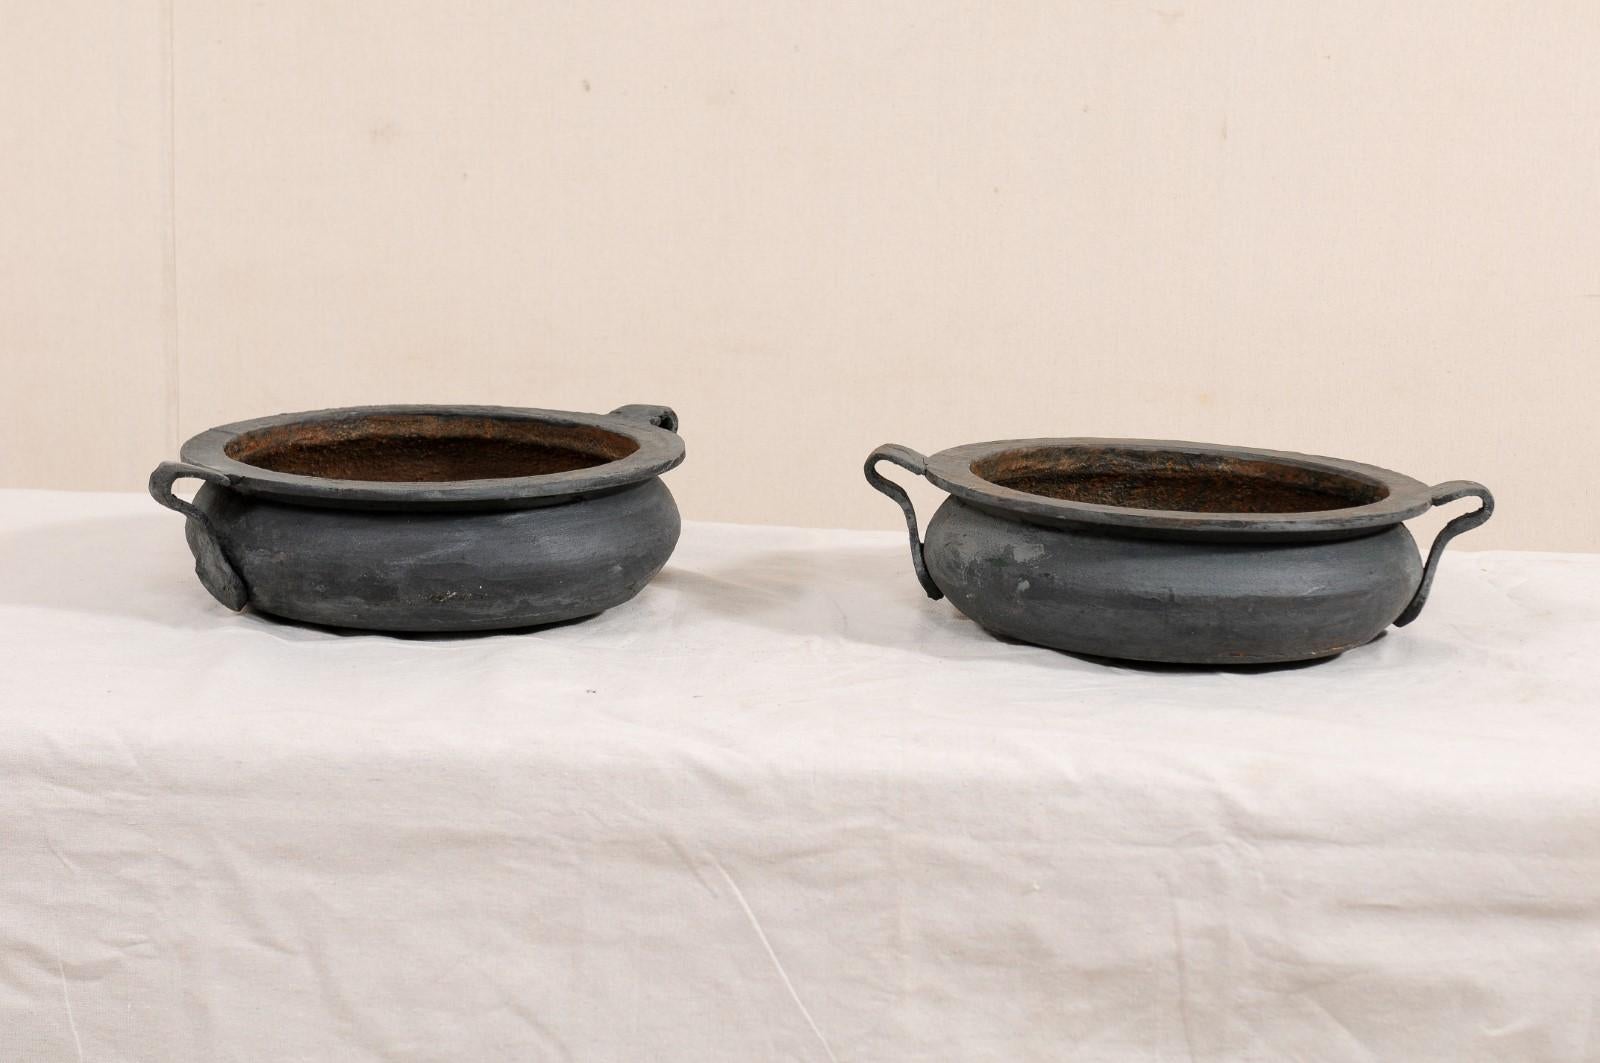 A pair of European cast iron vessels from the early 20th century. This pair of antique bowl planter, from the early 20th century and likely from France, are made from cast-iron and each vessel is circular in shape, shallow in depth, have nice wide